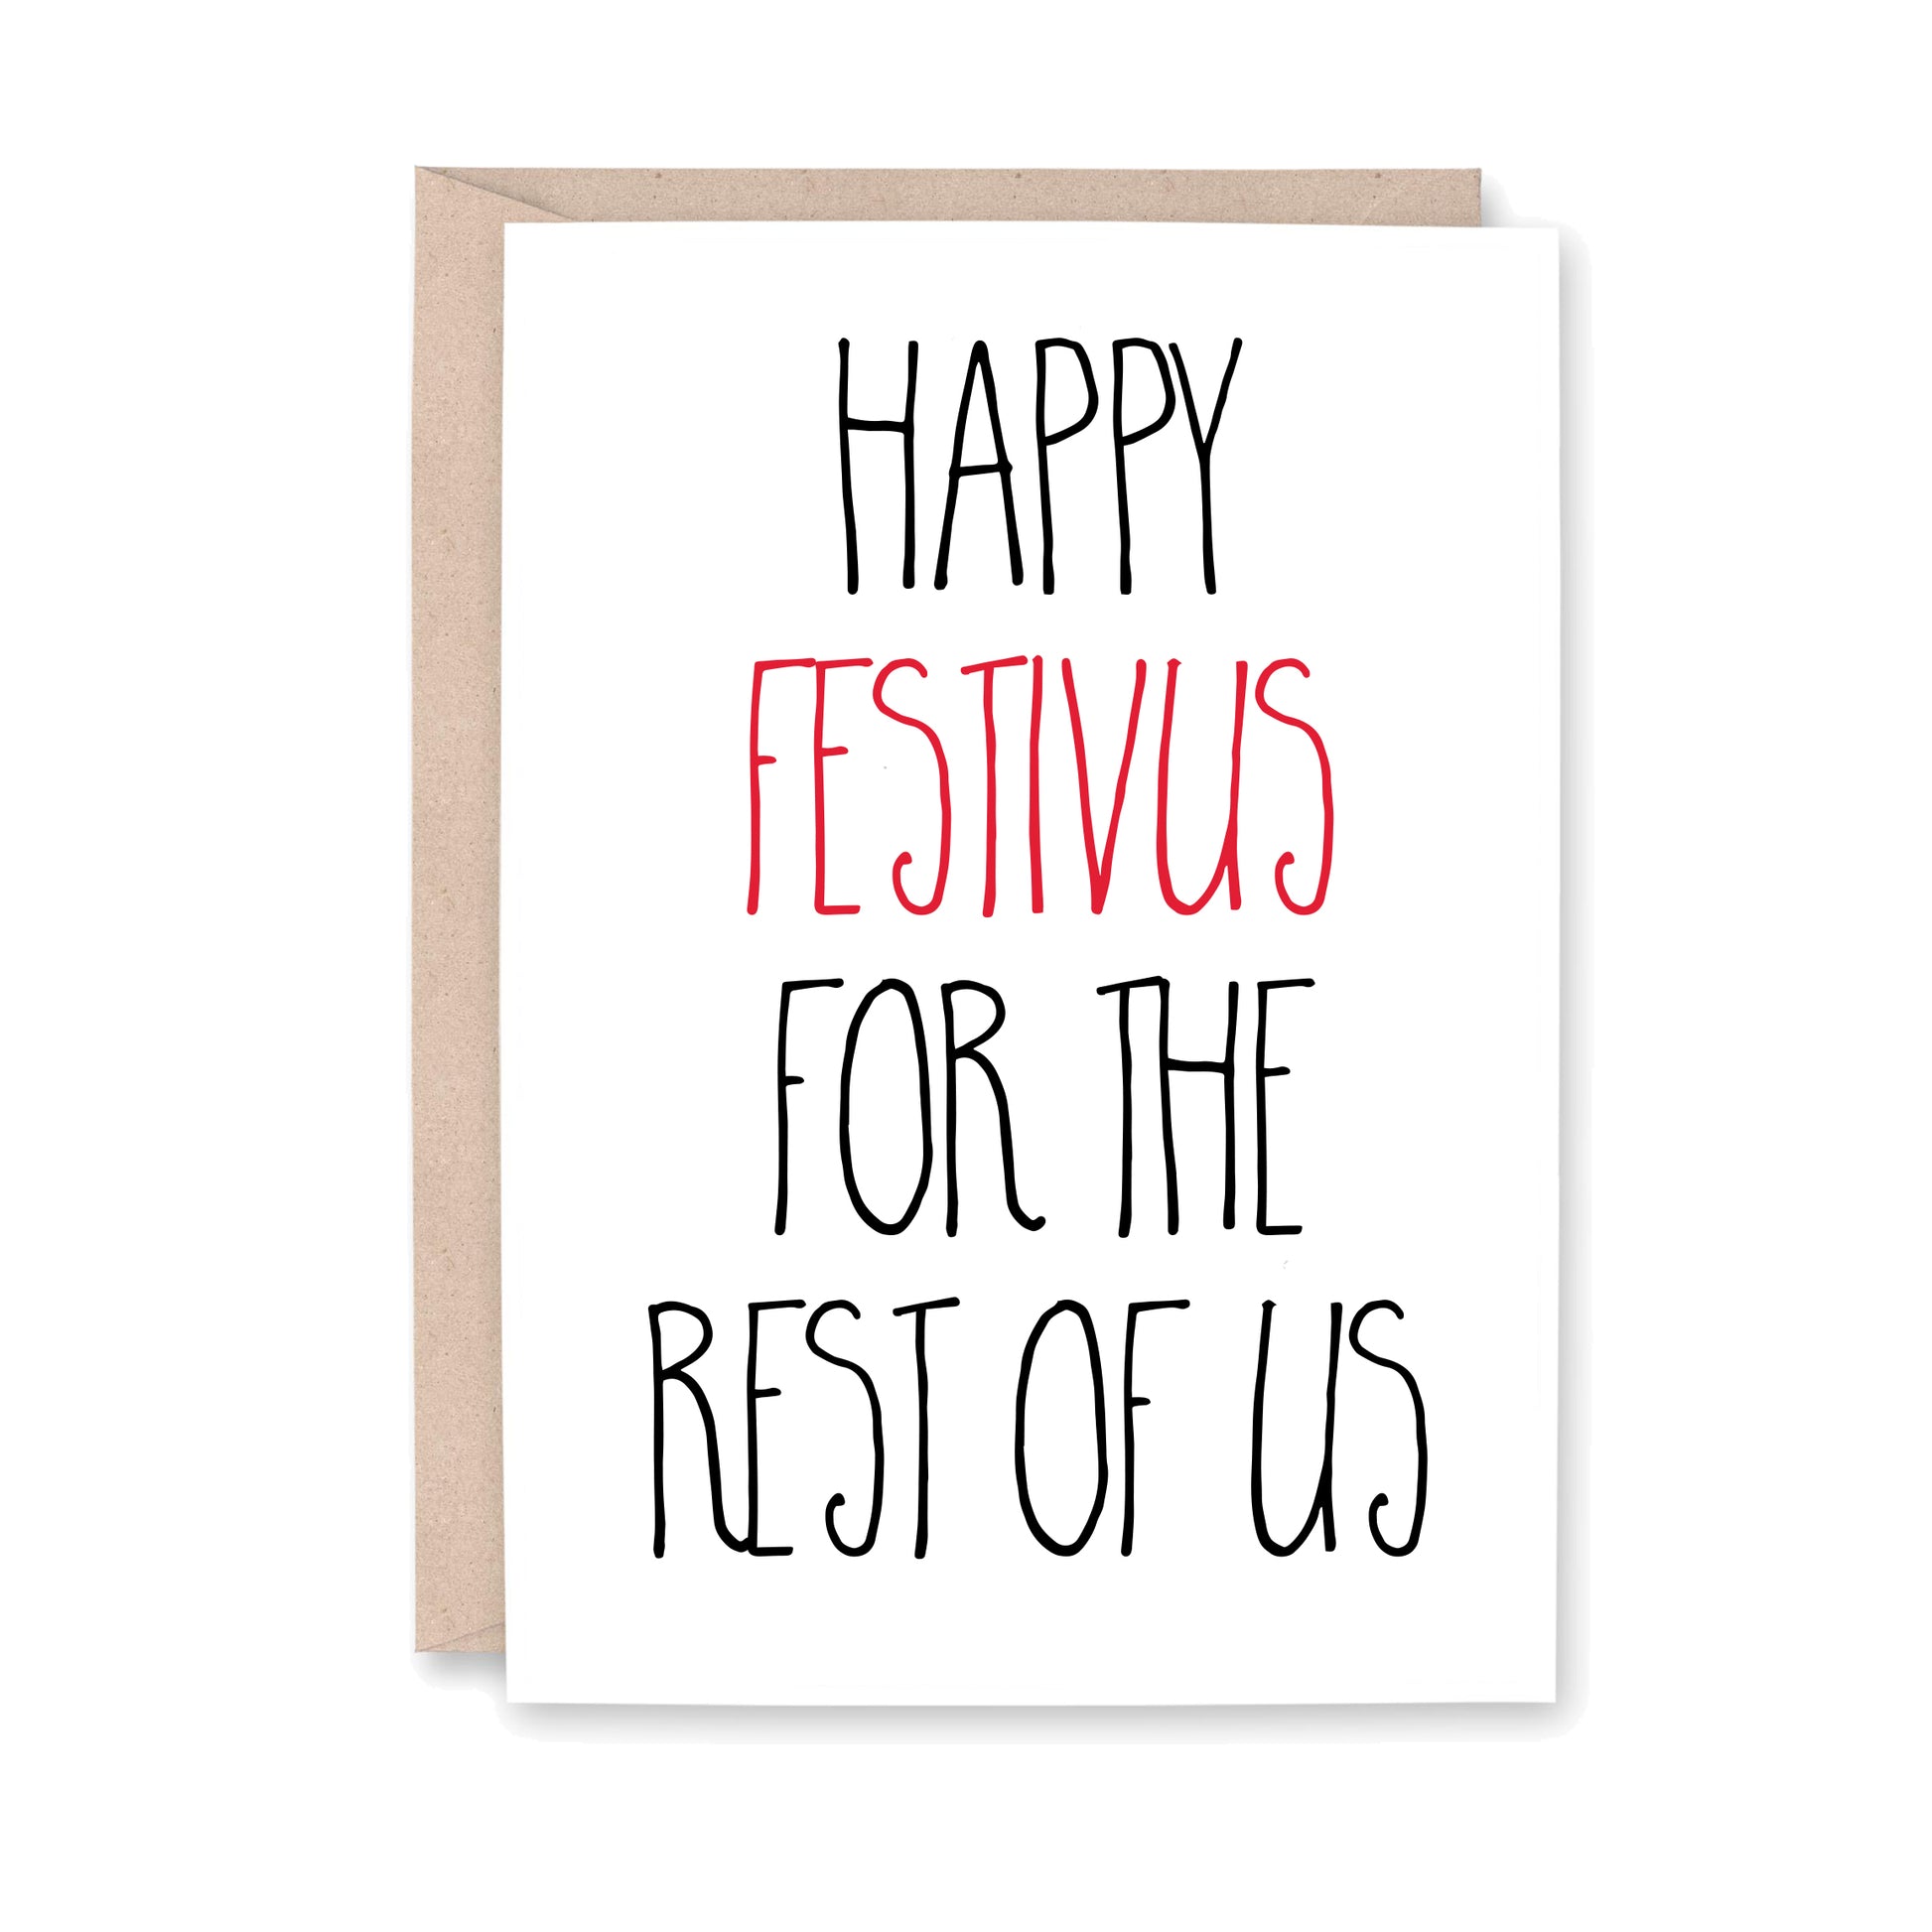 Happy Festivus for the Rest of Us